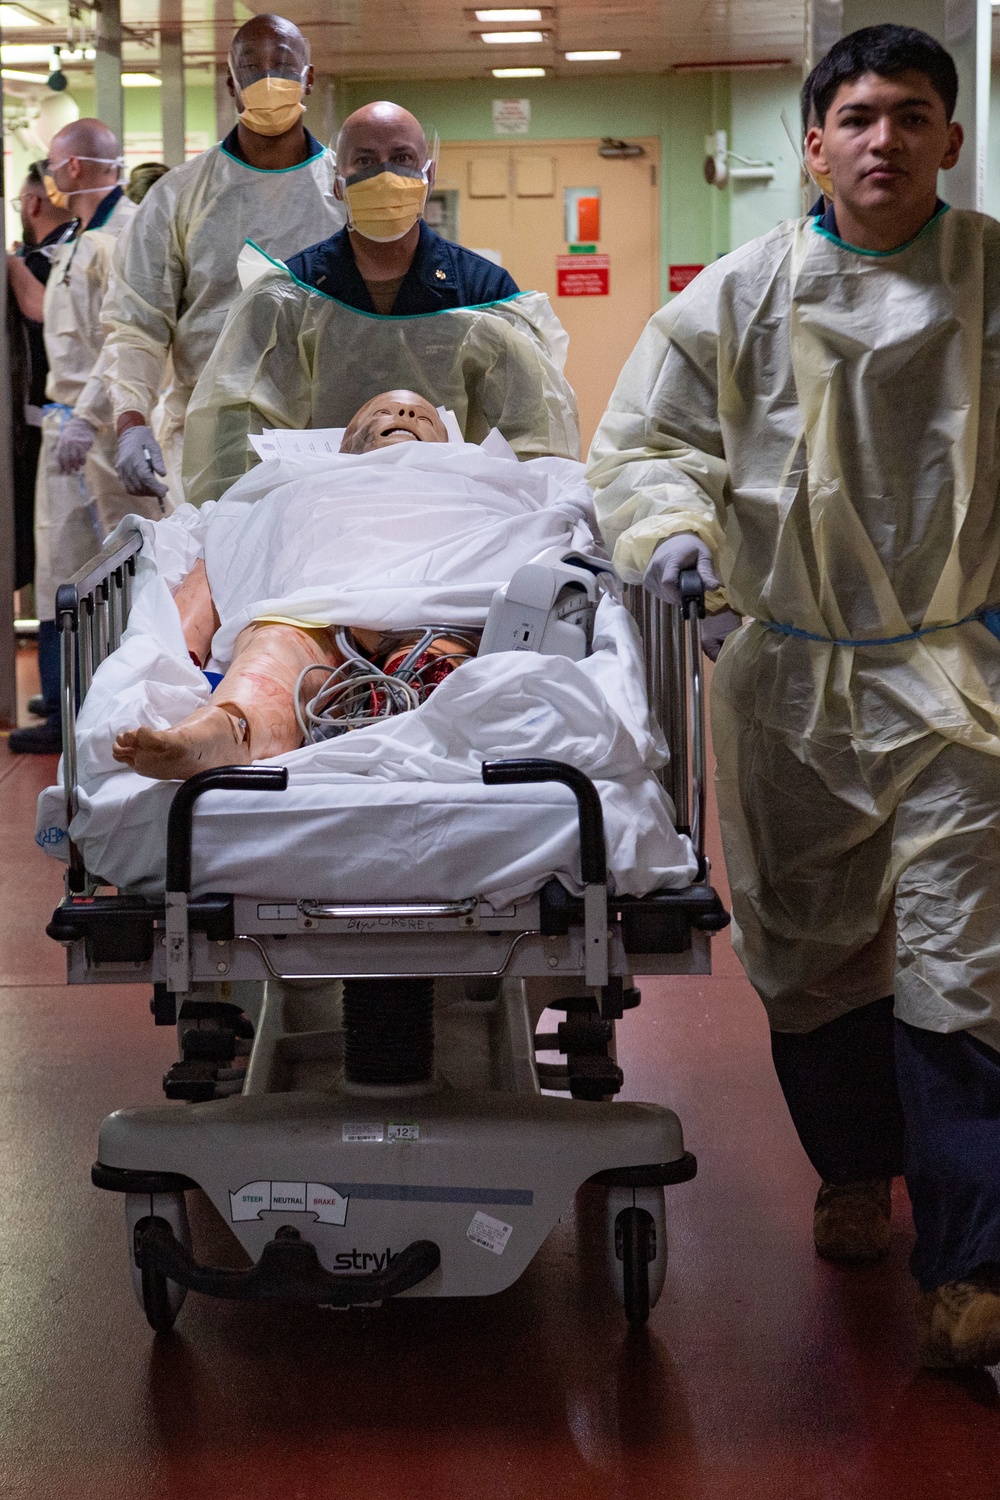 USNS Mercy Sailors Participate in Mass Casualty Drill